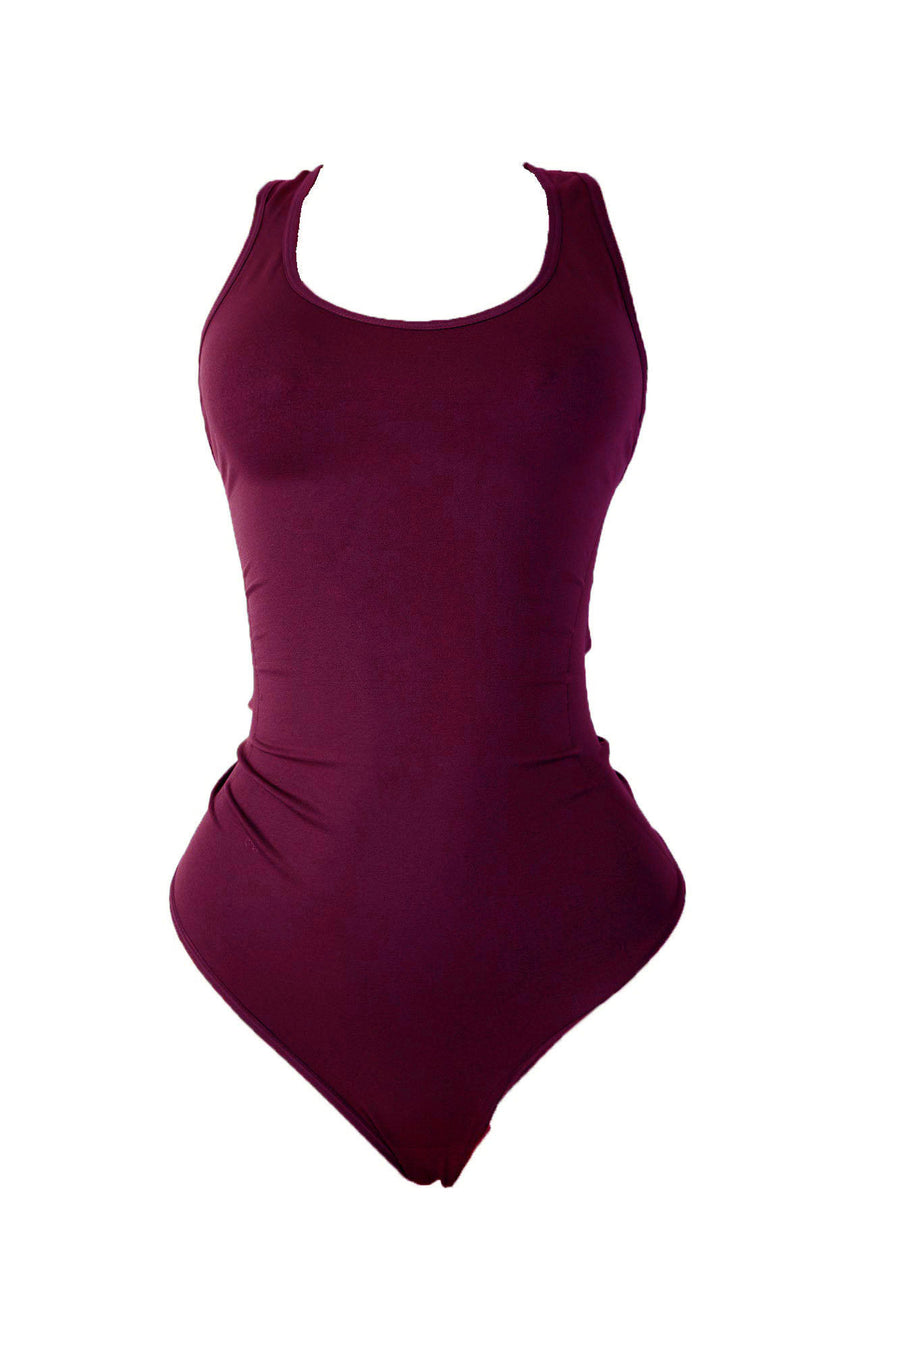 Burgundy Body By Babes Thong Bodysuit w/ Tummy Control fits up to plus